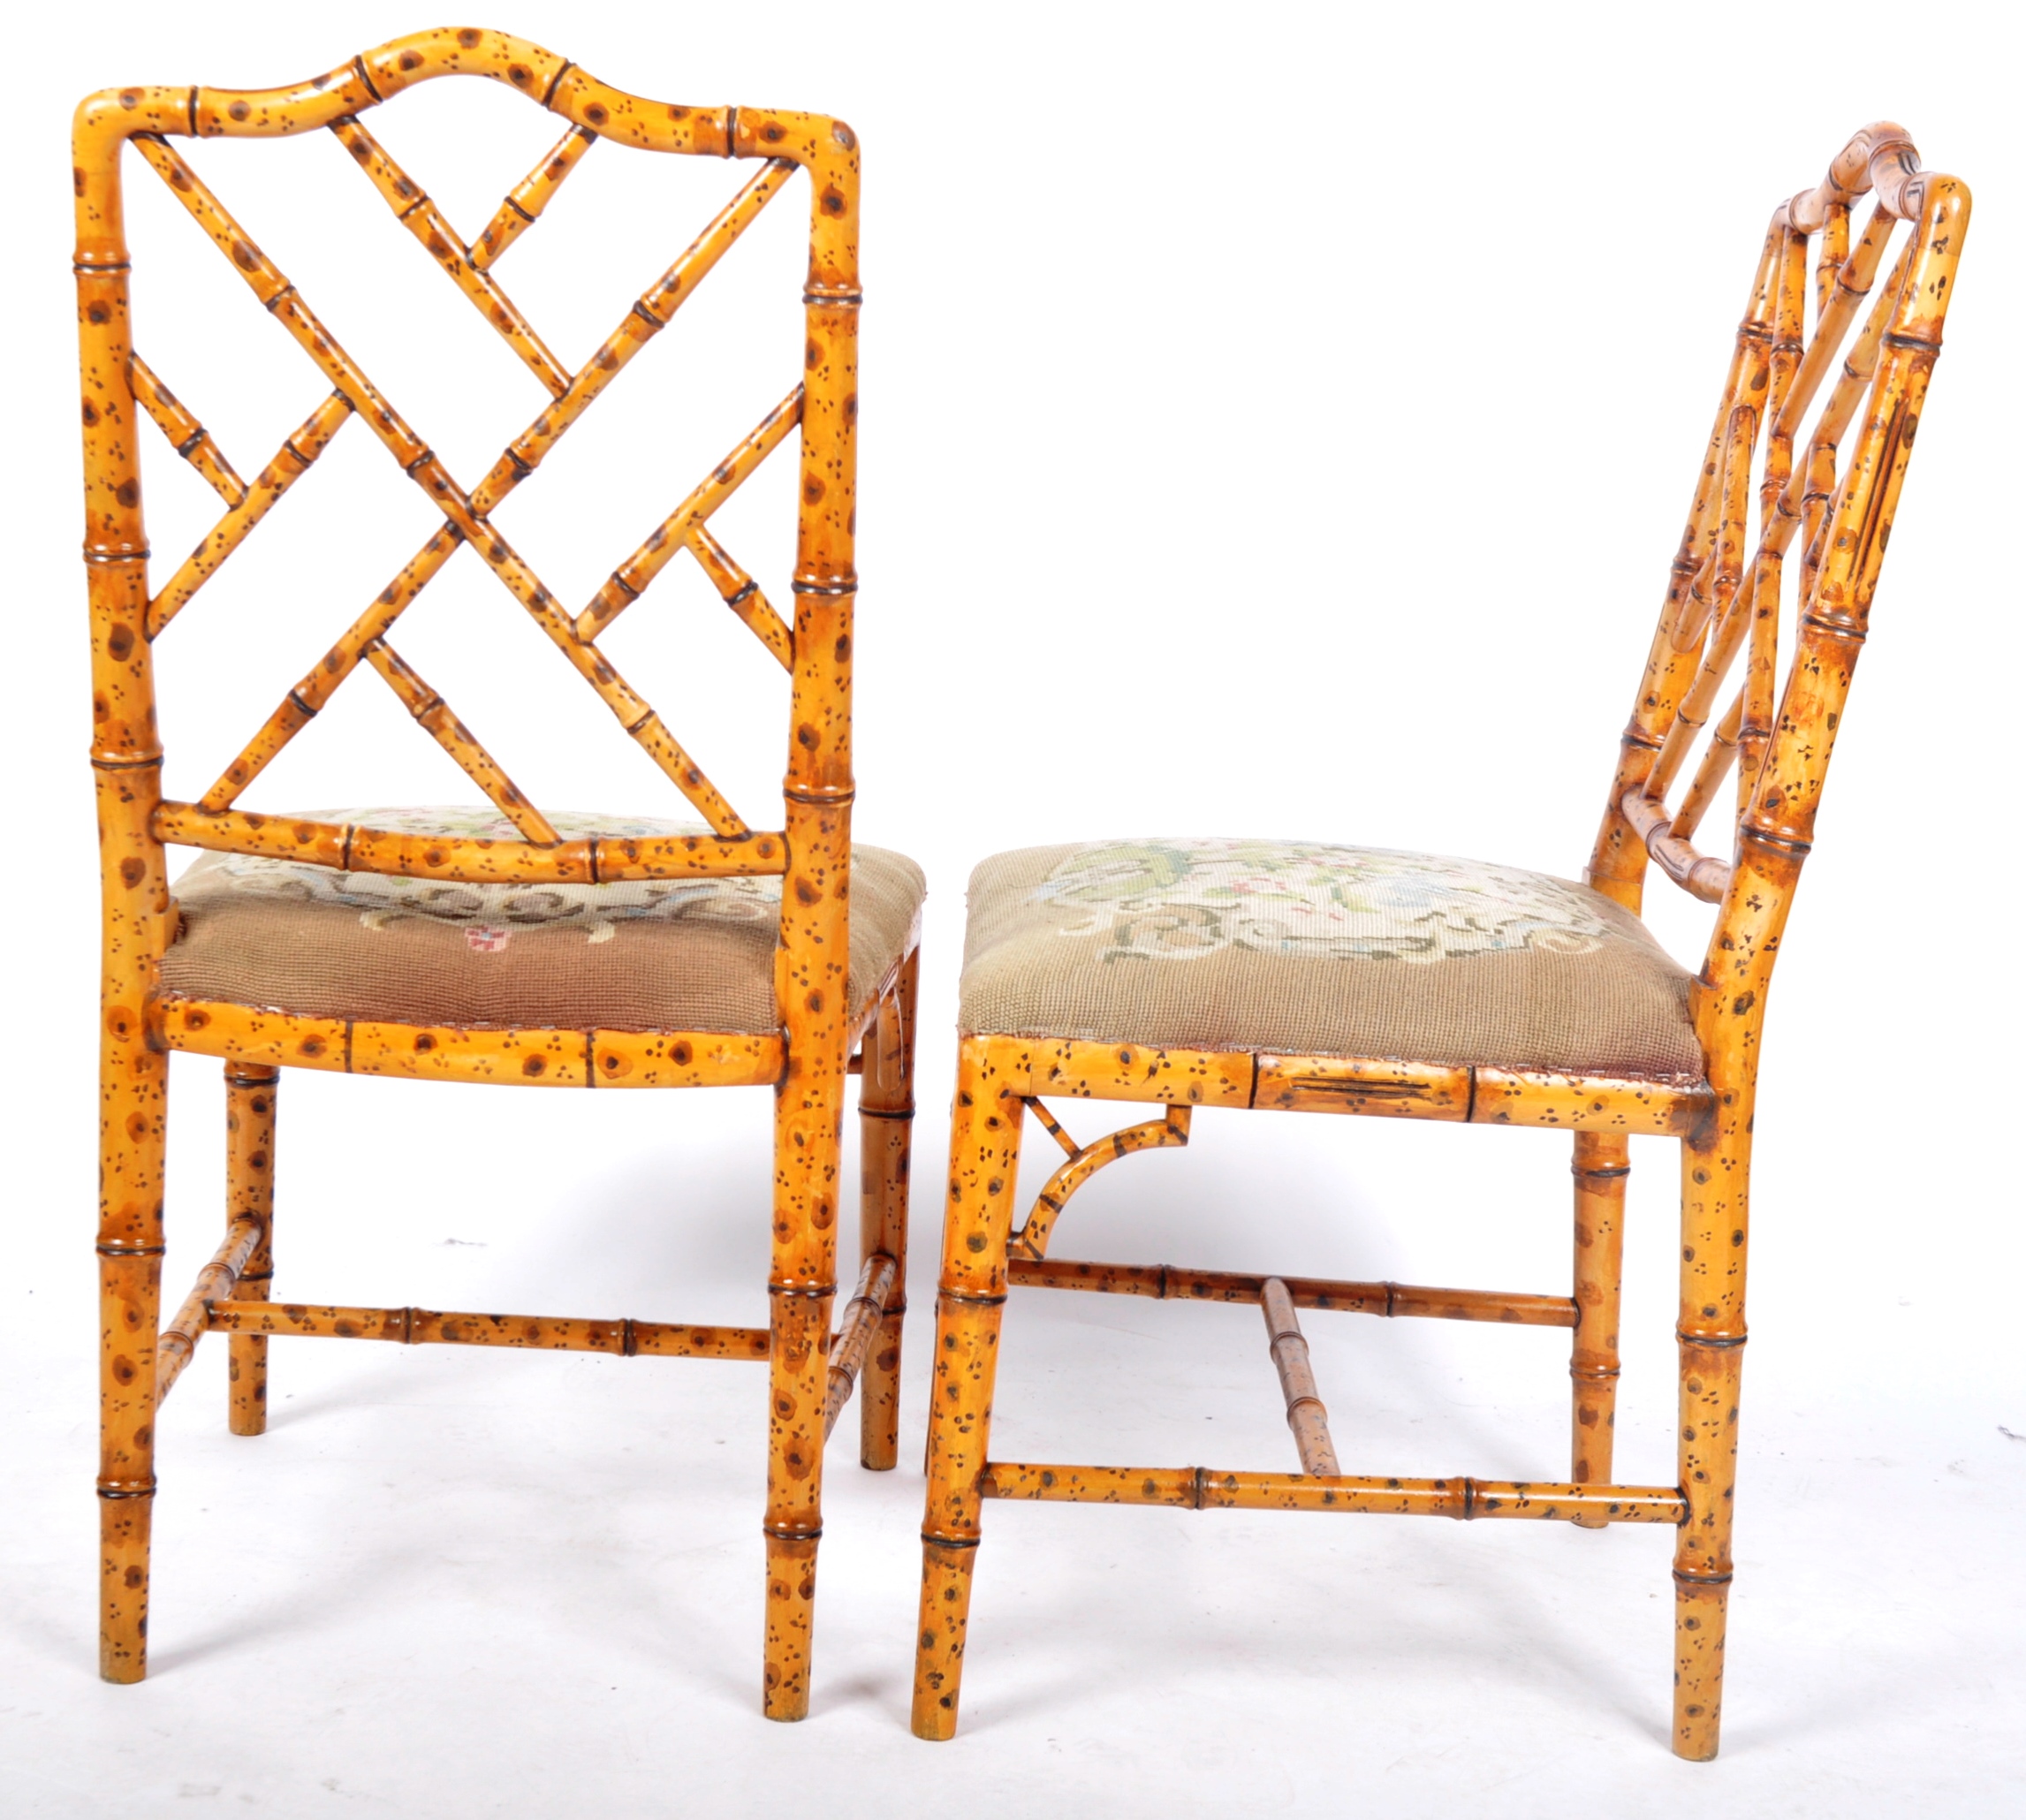 MATCHING PAIR OF 18TH CENTURY STYLE FAUX BAMBOO CHAIRS - Image 7 of 7